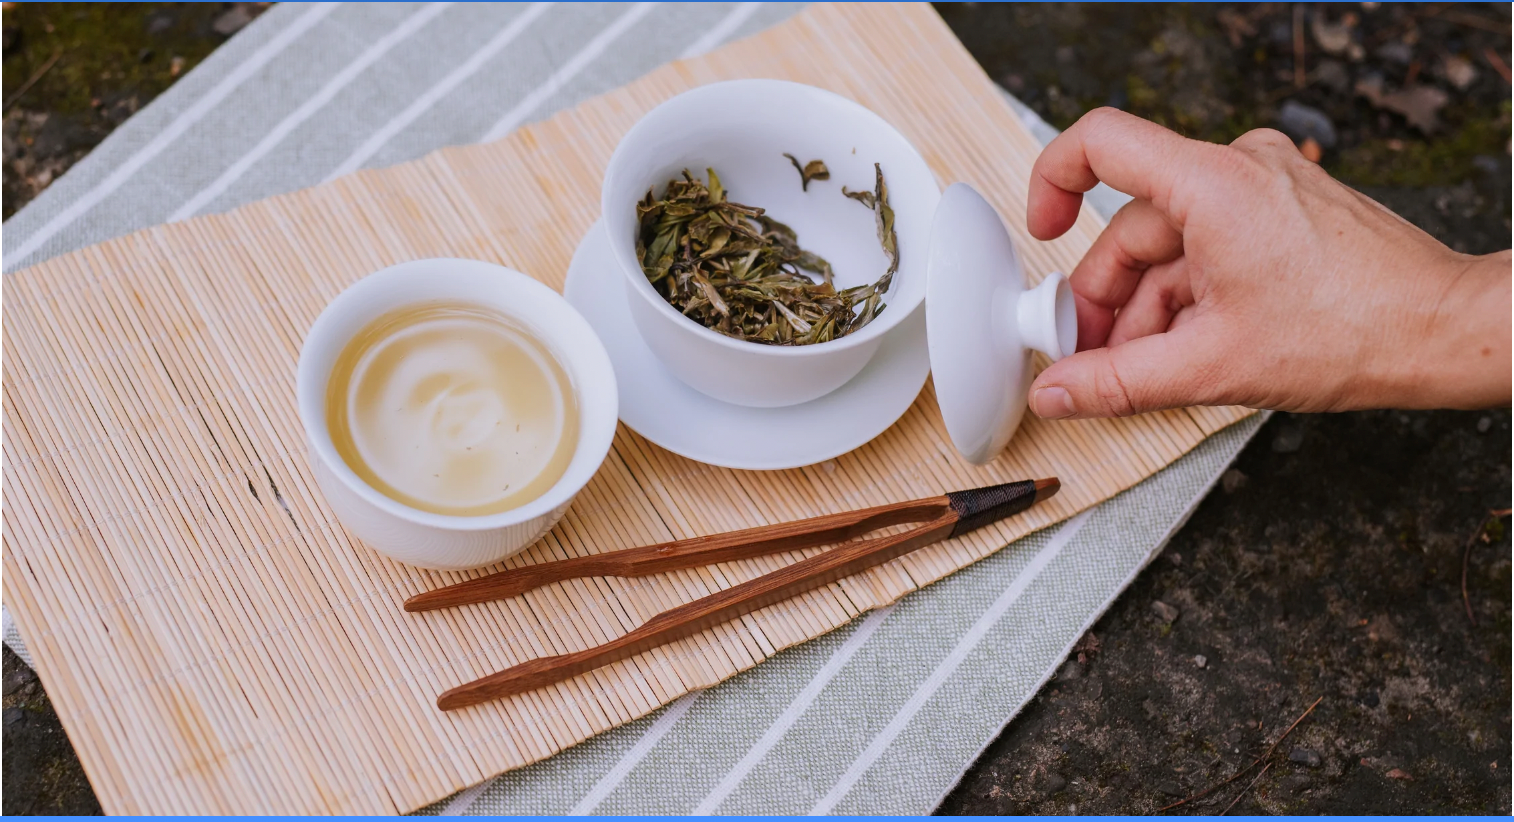 hand removing lid of gaiwan full of white tea sitting next to small cup of white tea